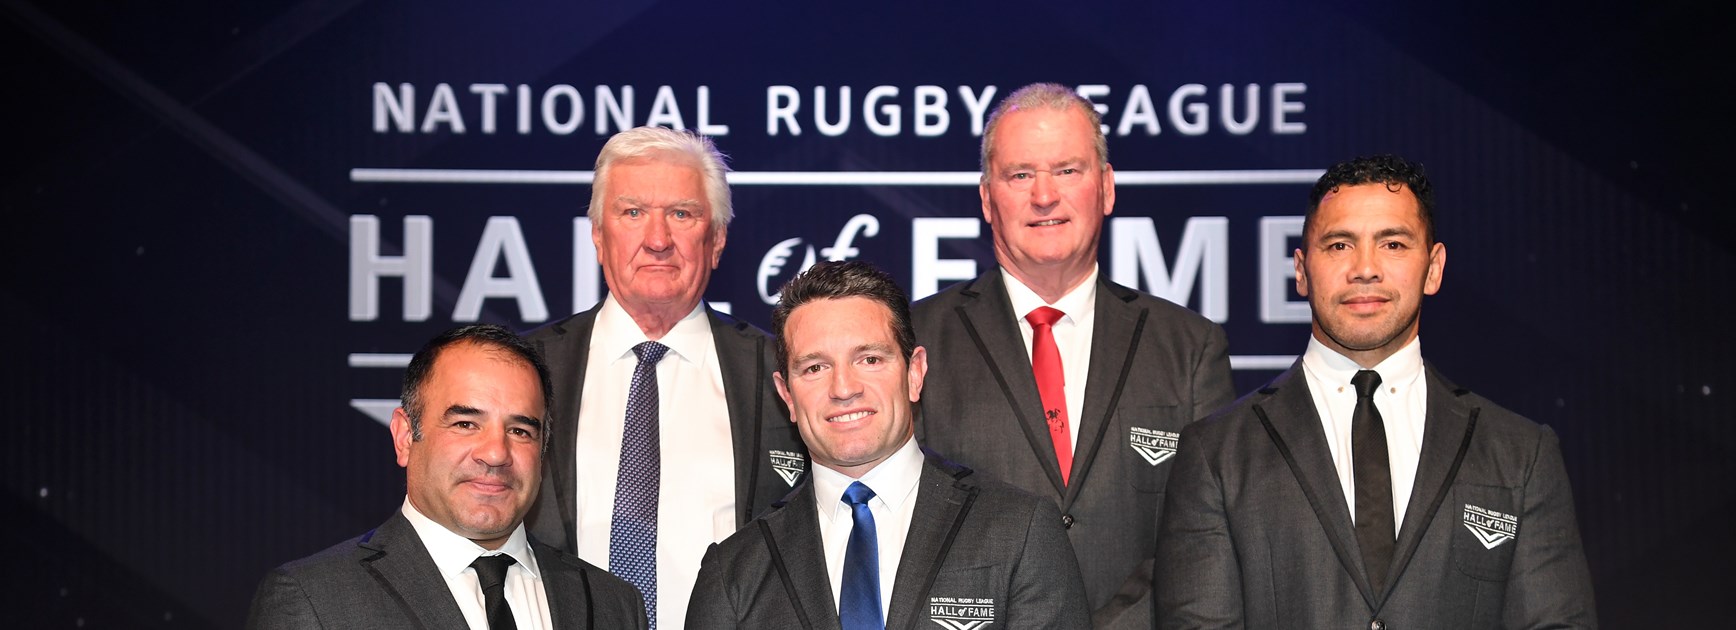 Hall of Fame highlights everything good about rugby league